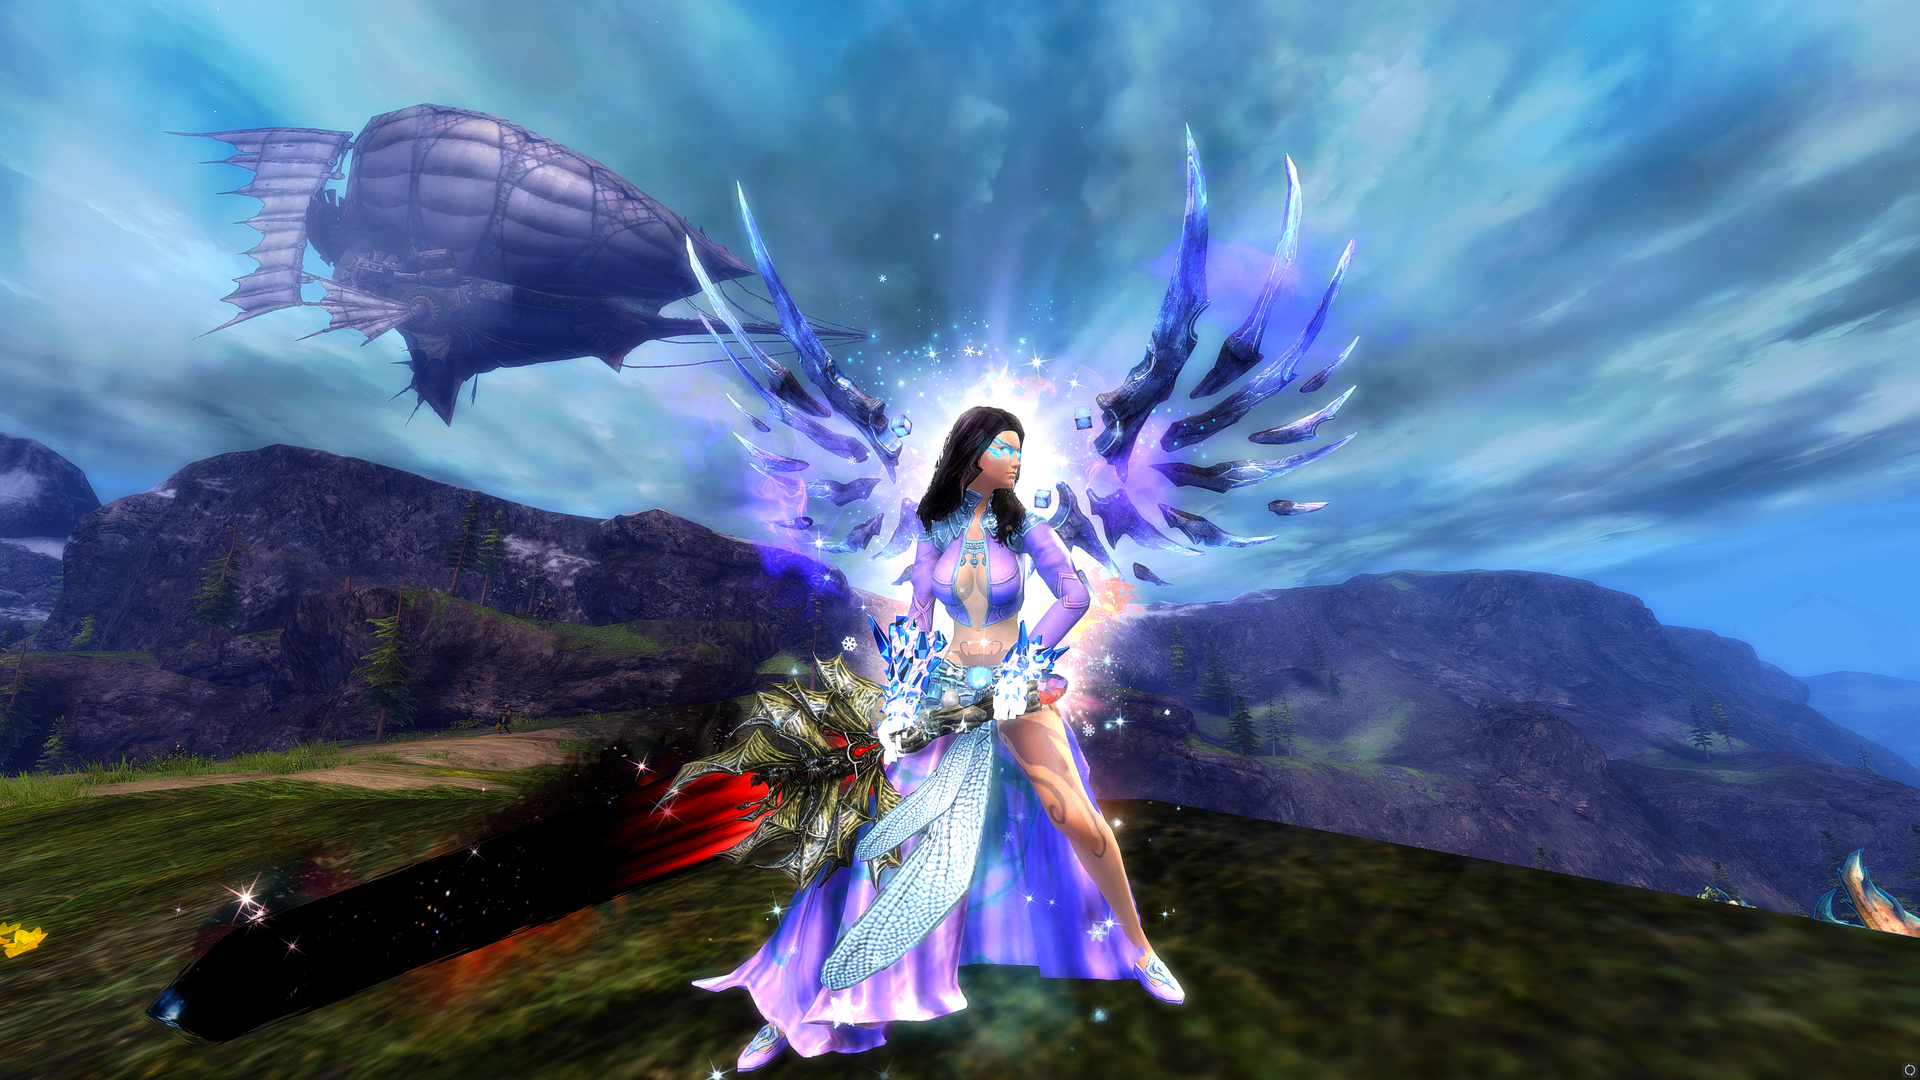 Guild Wars 2 Mesmer with Ad Infinitum